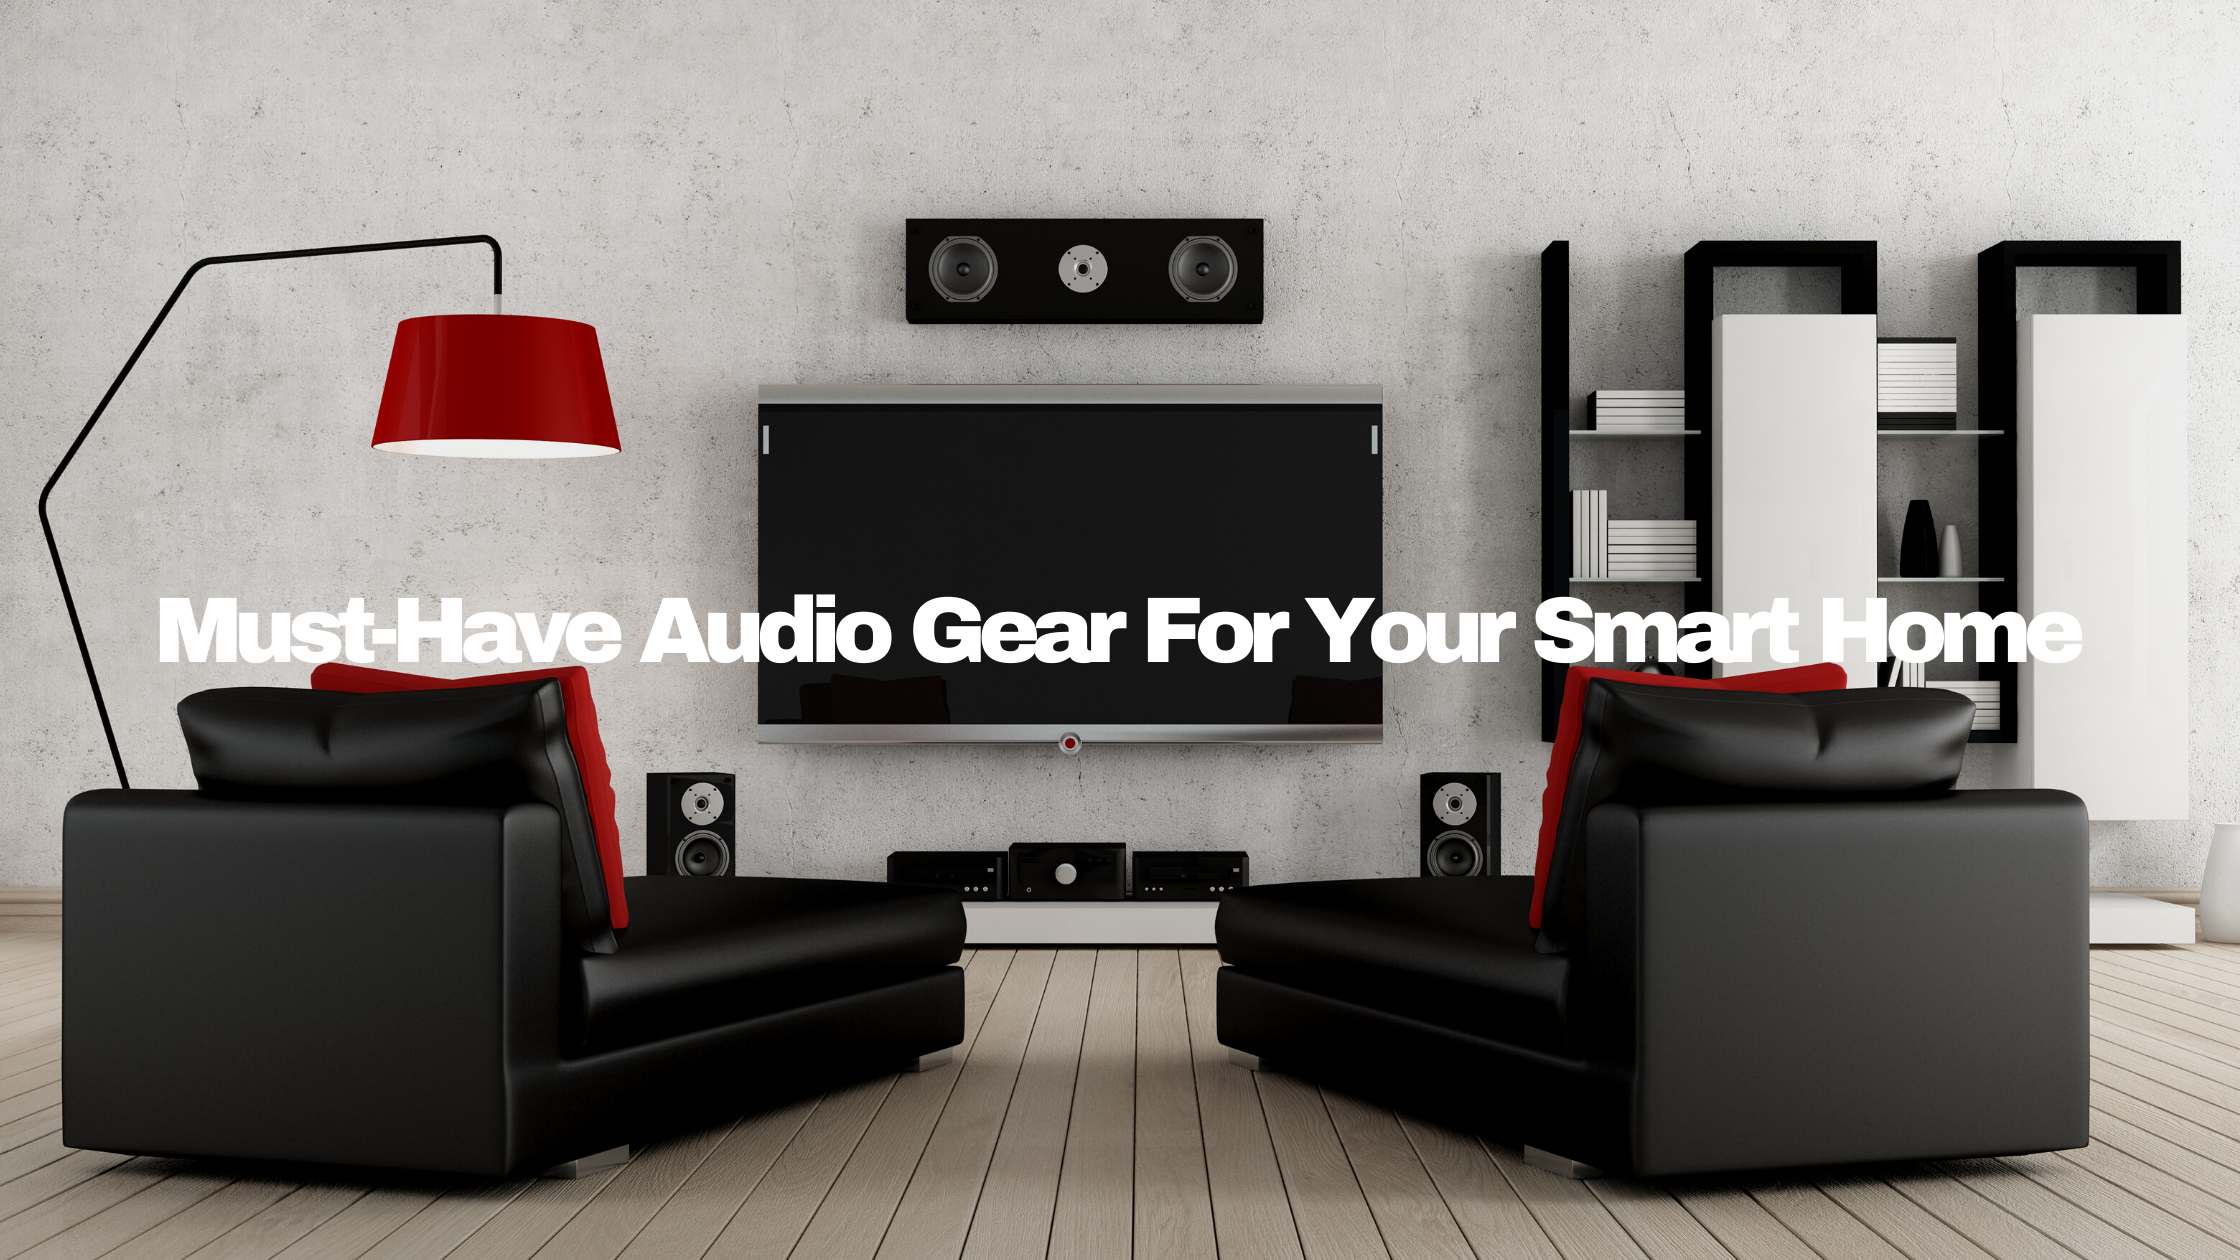 Must-Have Audio Gear For Your Smart Home - Make Your Ears Happy Without Breaking The Bank!